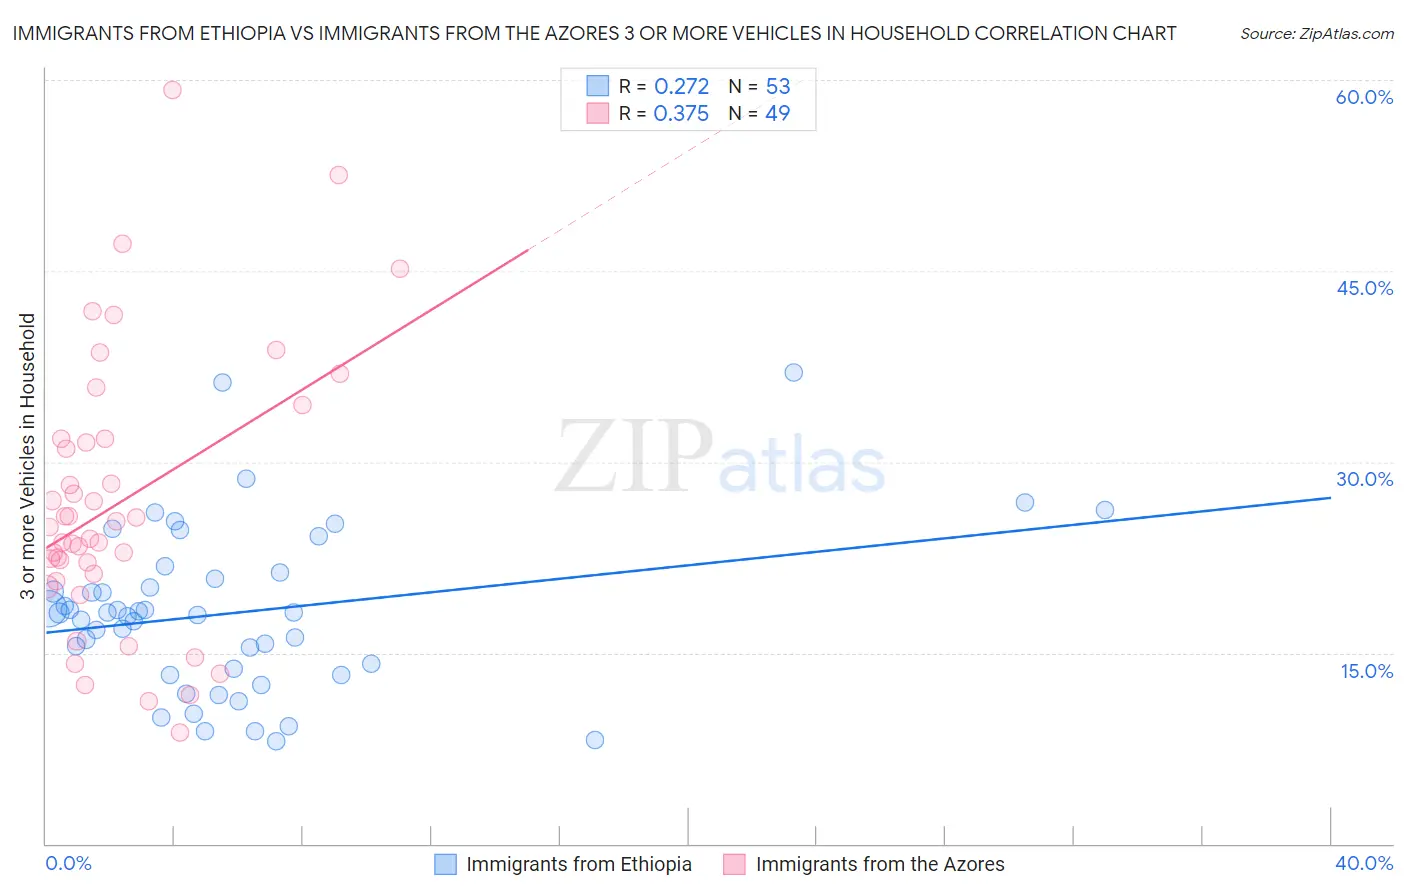 Immigrants from Ethiopia vs Immigrants from the Azores 3 or more Vehicles in Household